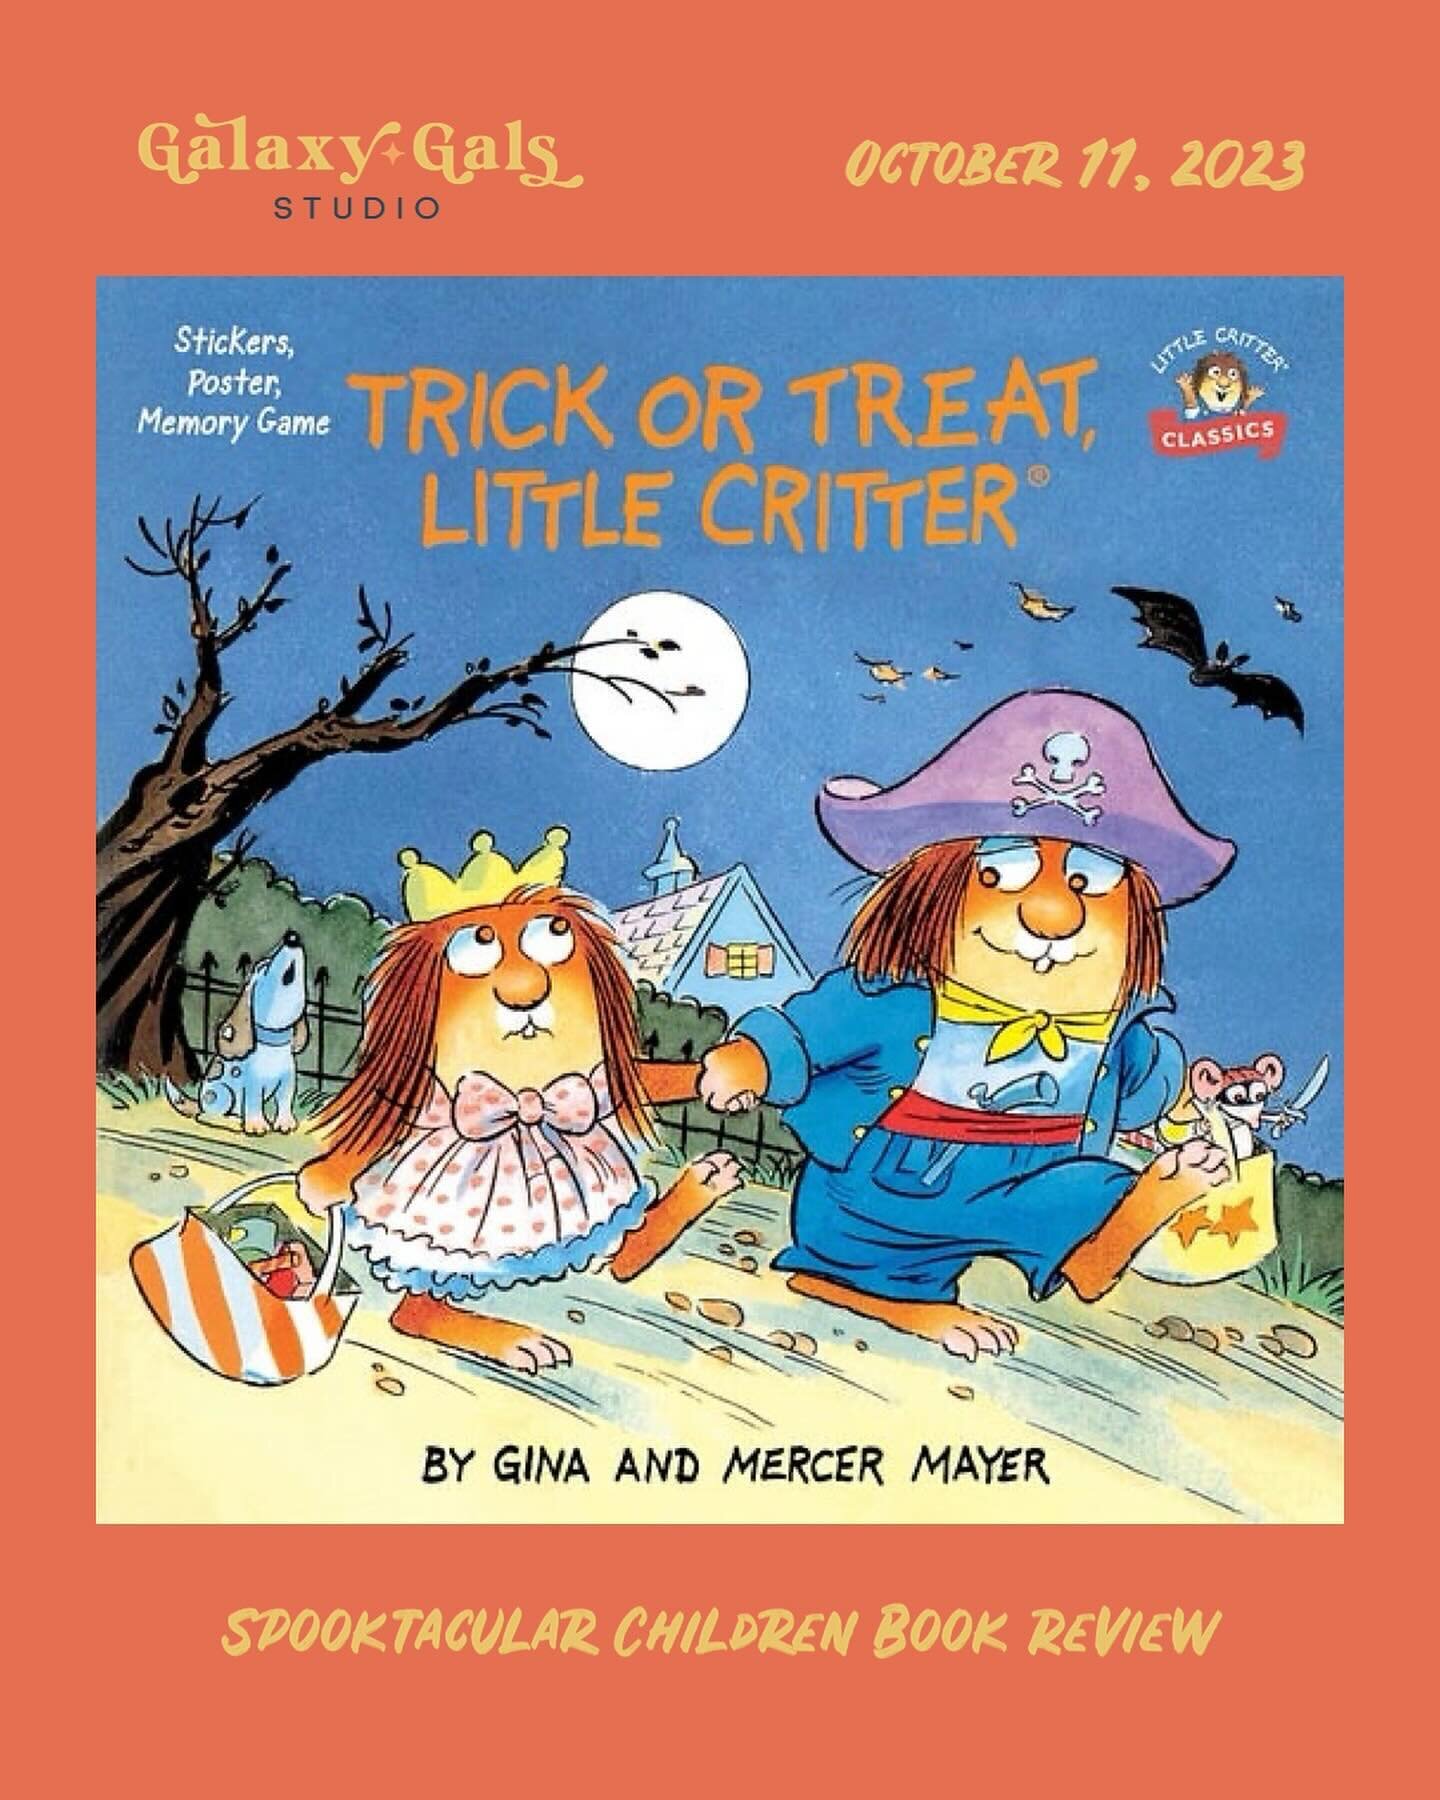 For the full review of Trick Or Treat Little Critter by Gina and Mercer Mayer, visit our newsletter link in our bio. 

Welcome to our Spooktacular Reads! We are celebrating my favorite holiday by reviewing Halloween and other spooky/fall-themed child